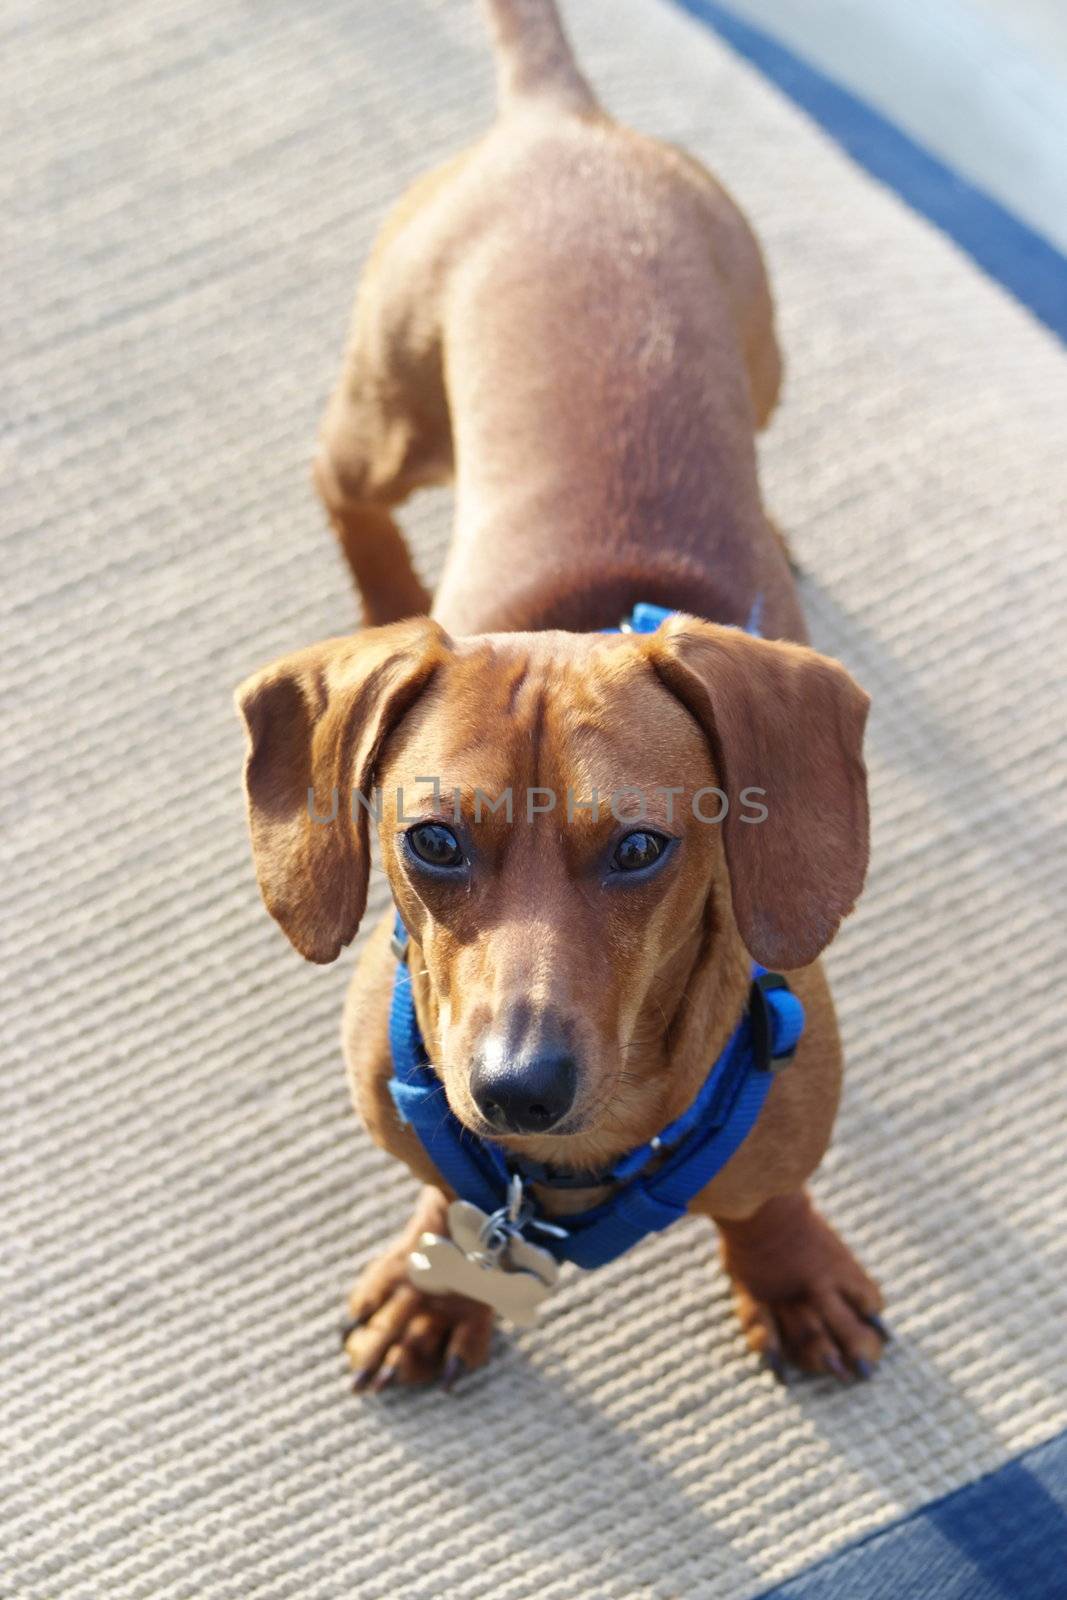 A miniature dachshund looking up at the camera.